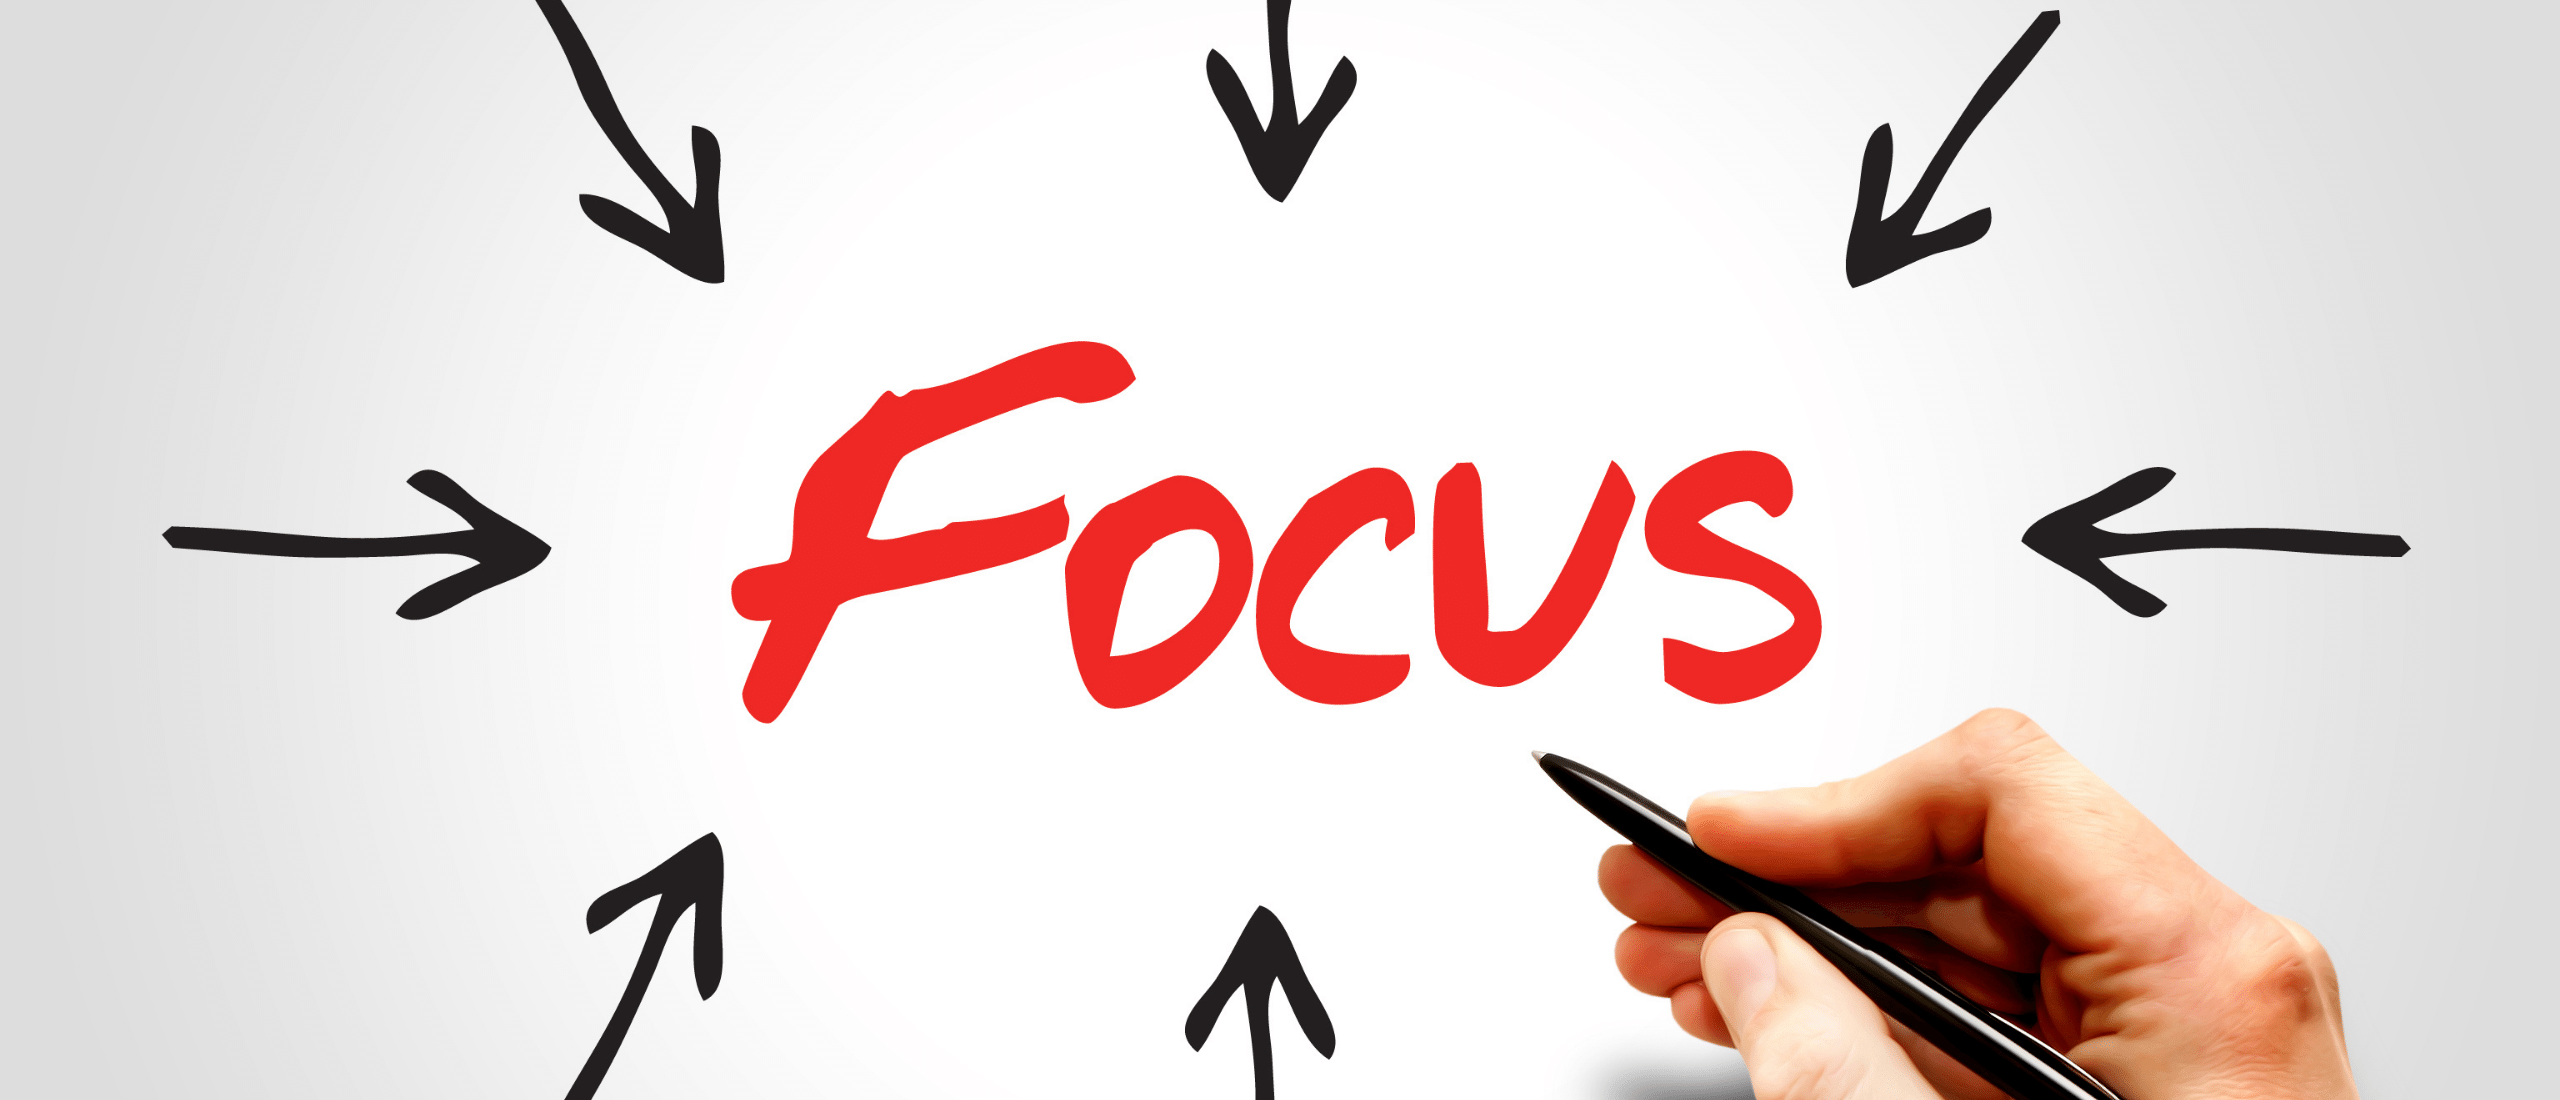 Crystal Clear Entrepreneurial Ambition as the Basis for Focus in Your Business